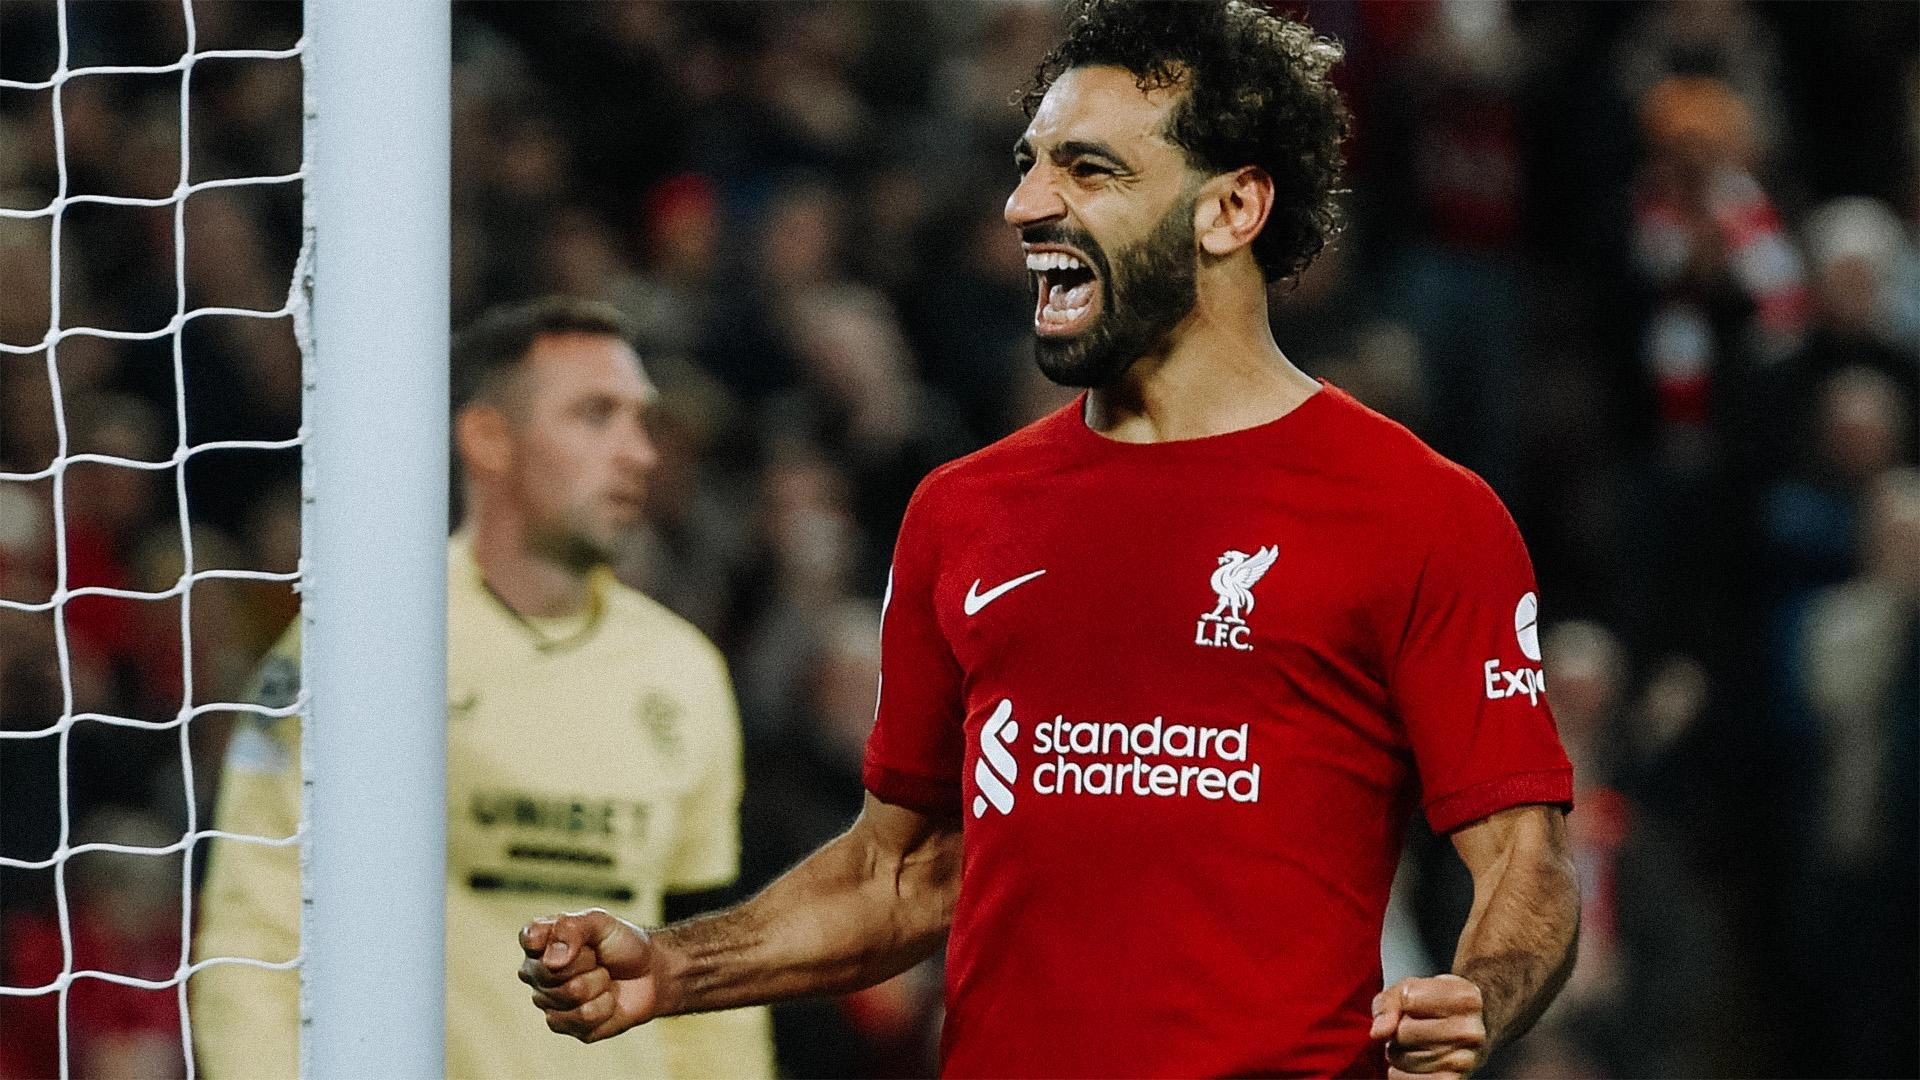 Champions League top scorers after group stages – Salah level with